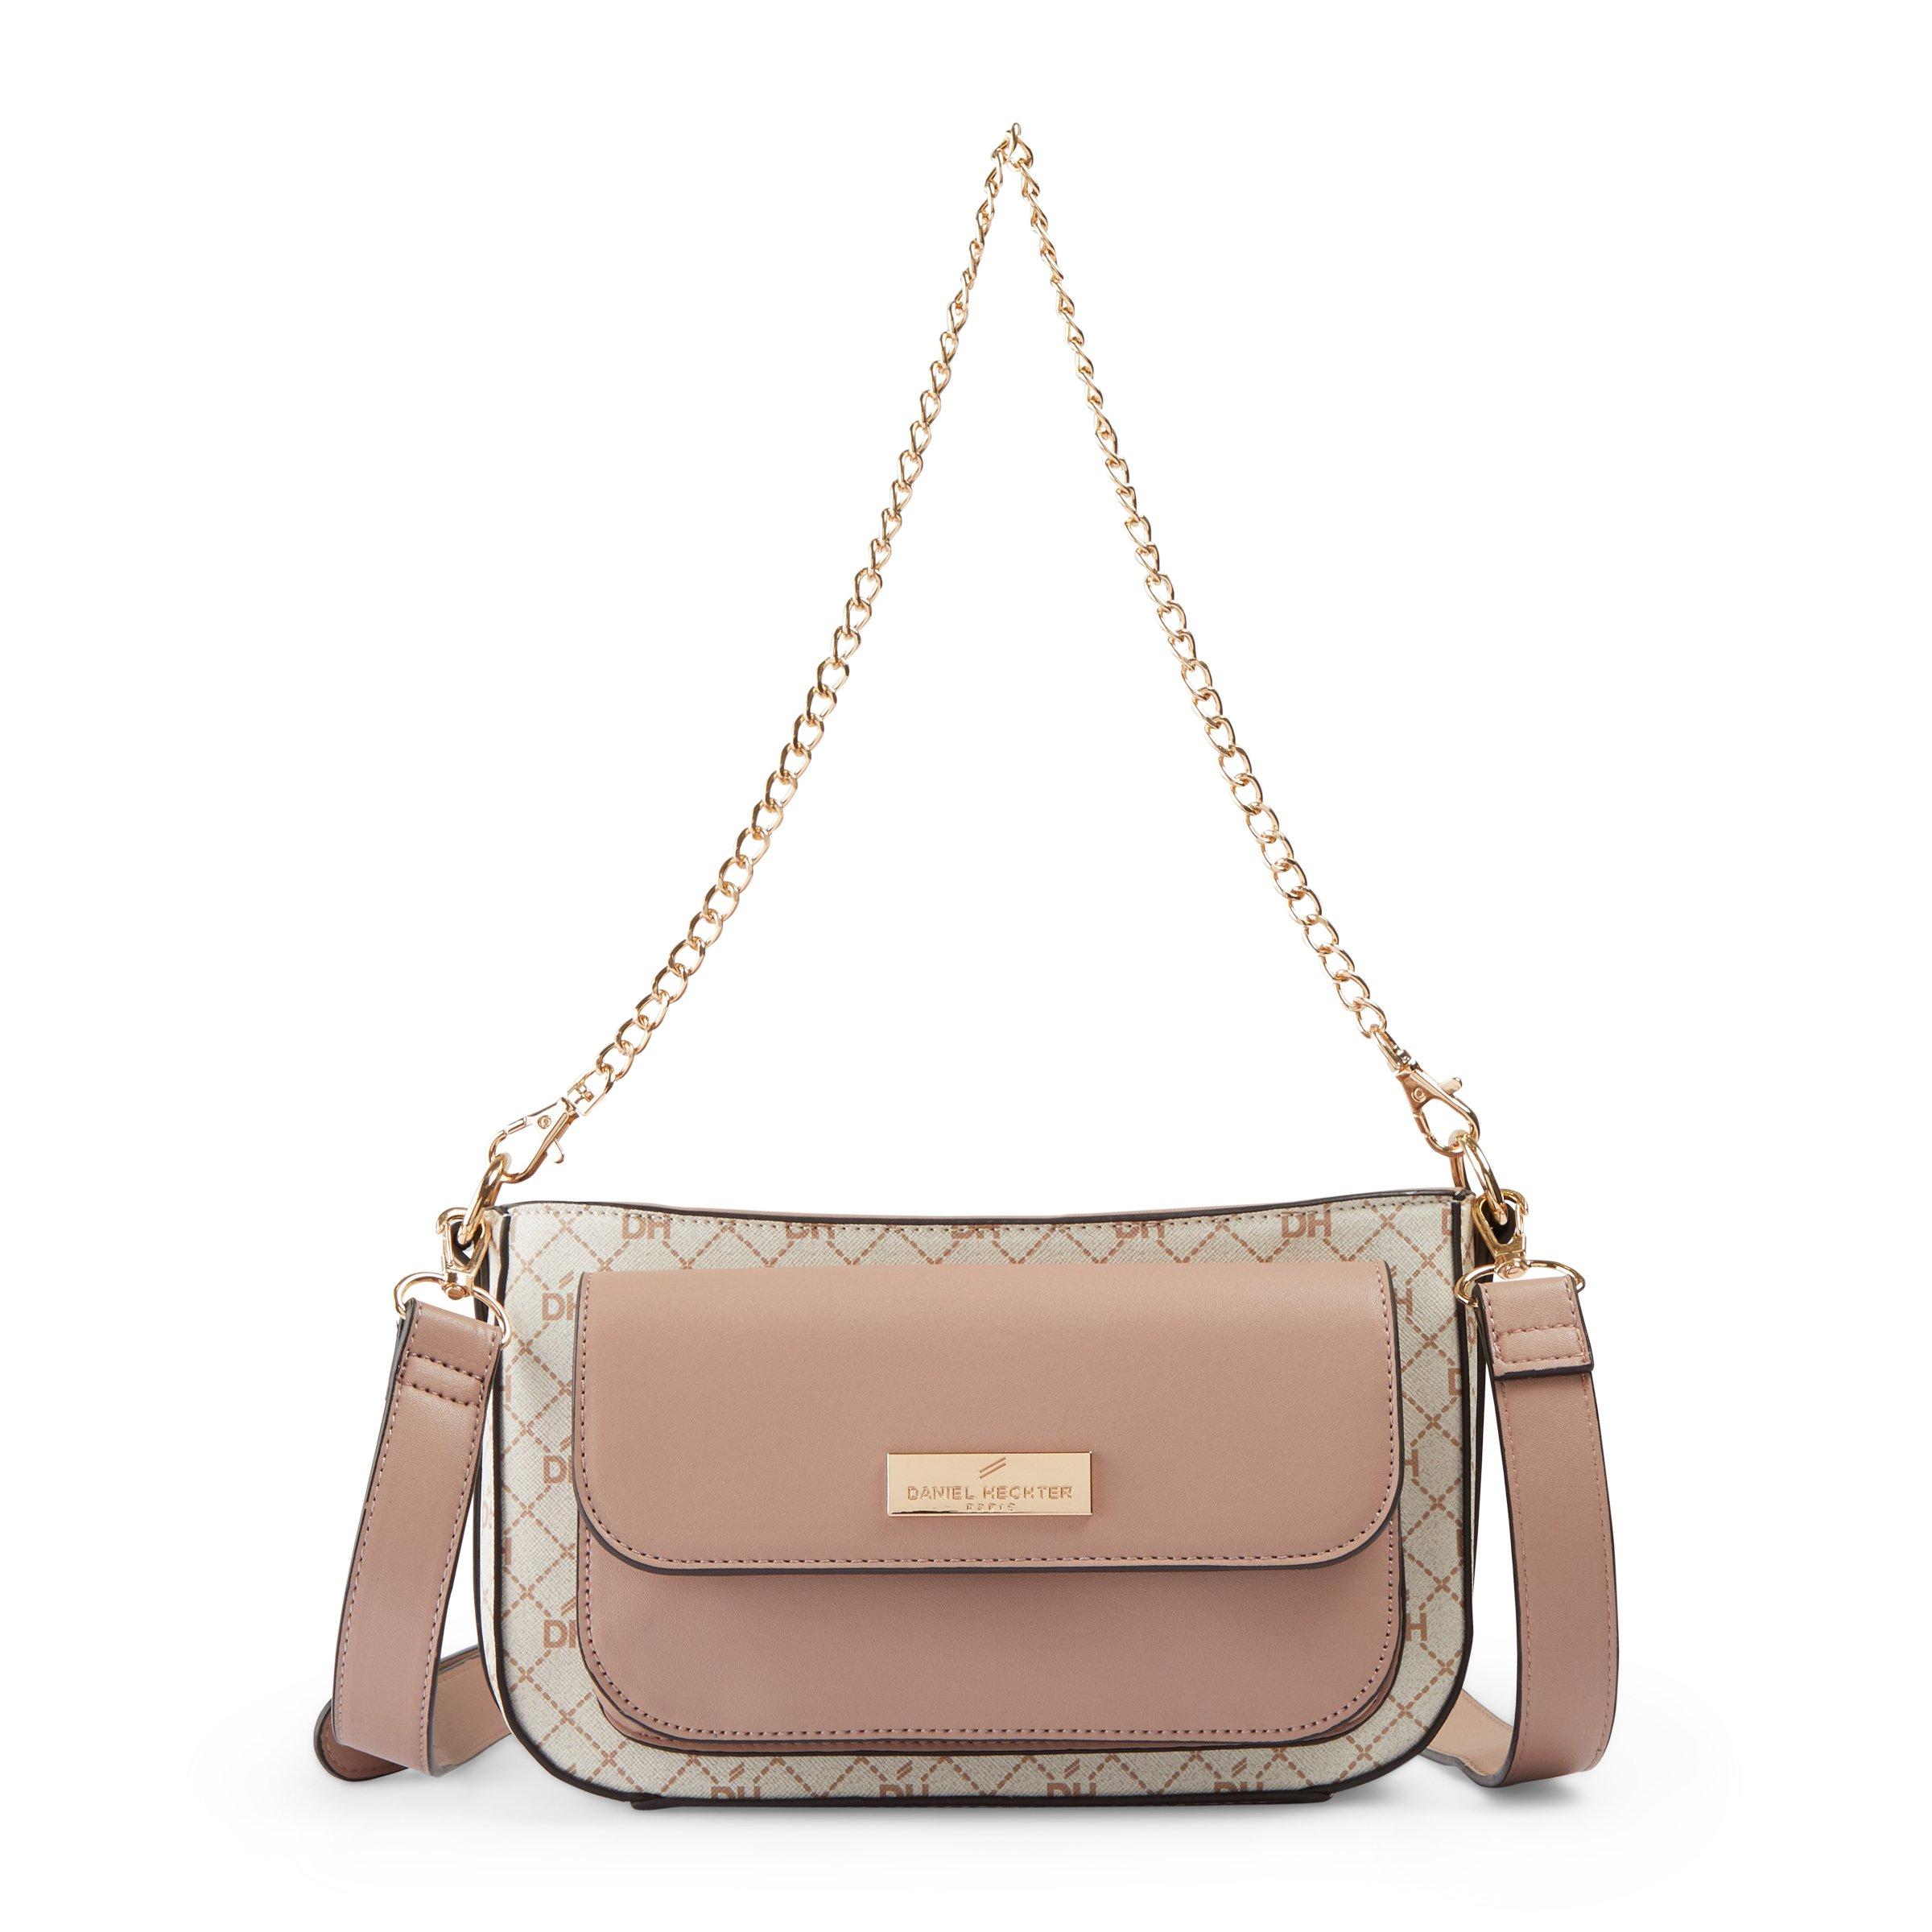 Truworths Fashion - Bag this beauty from Daniel Hechter type/style  2612/804!